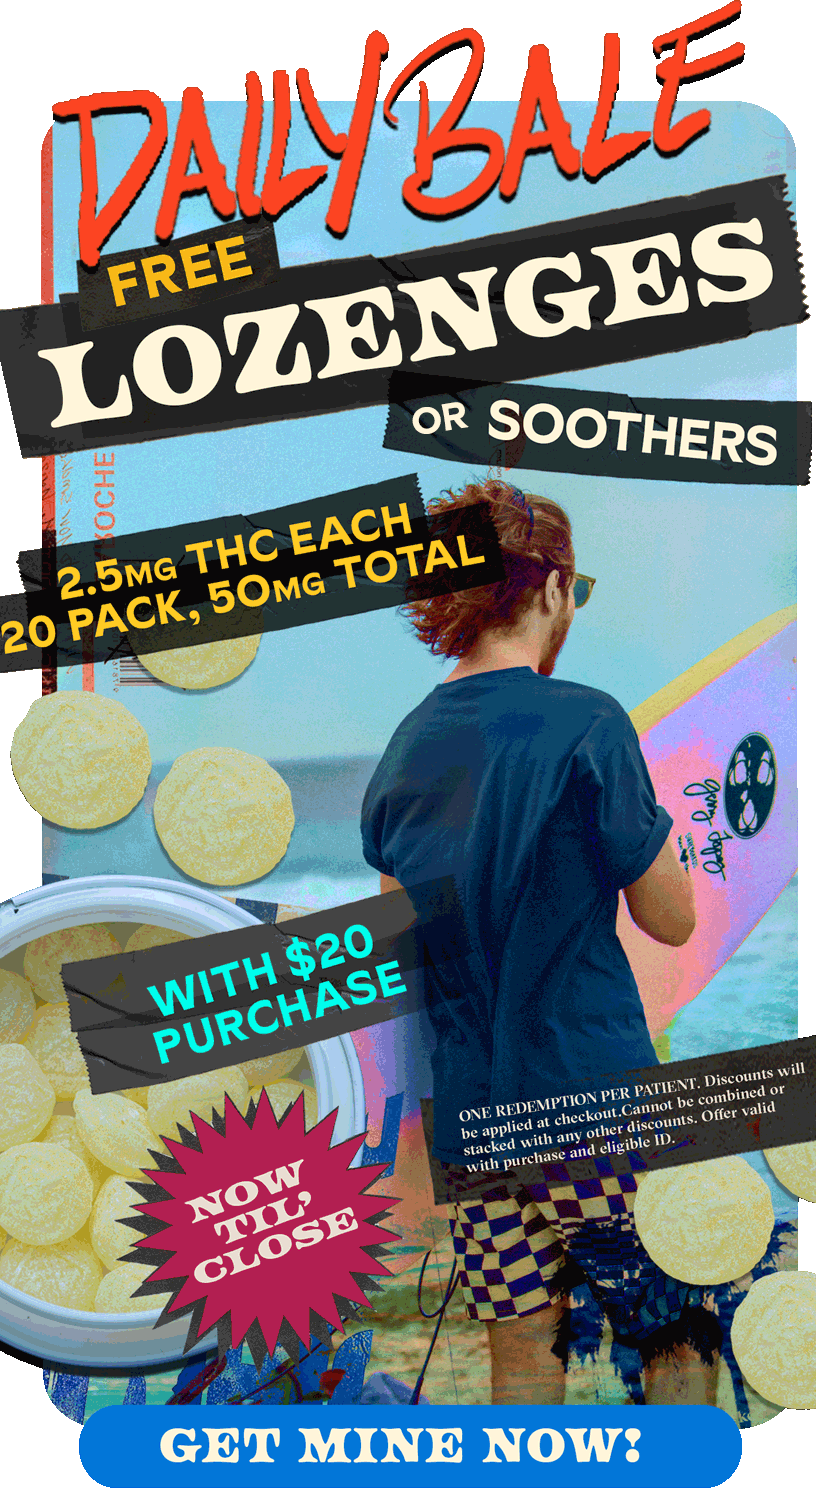 Daily Bale Free Lozenges With $20 Purchase MayWeek2